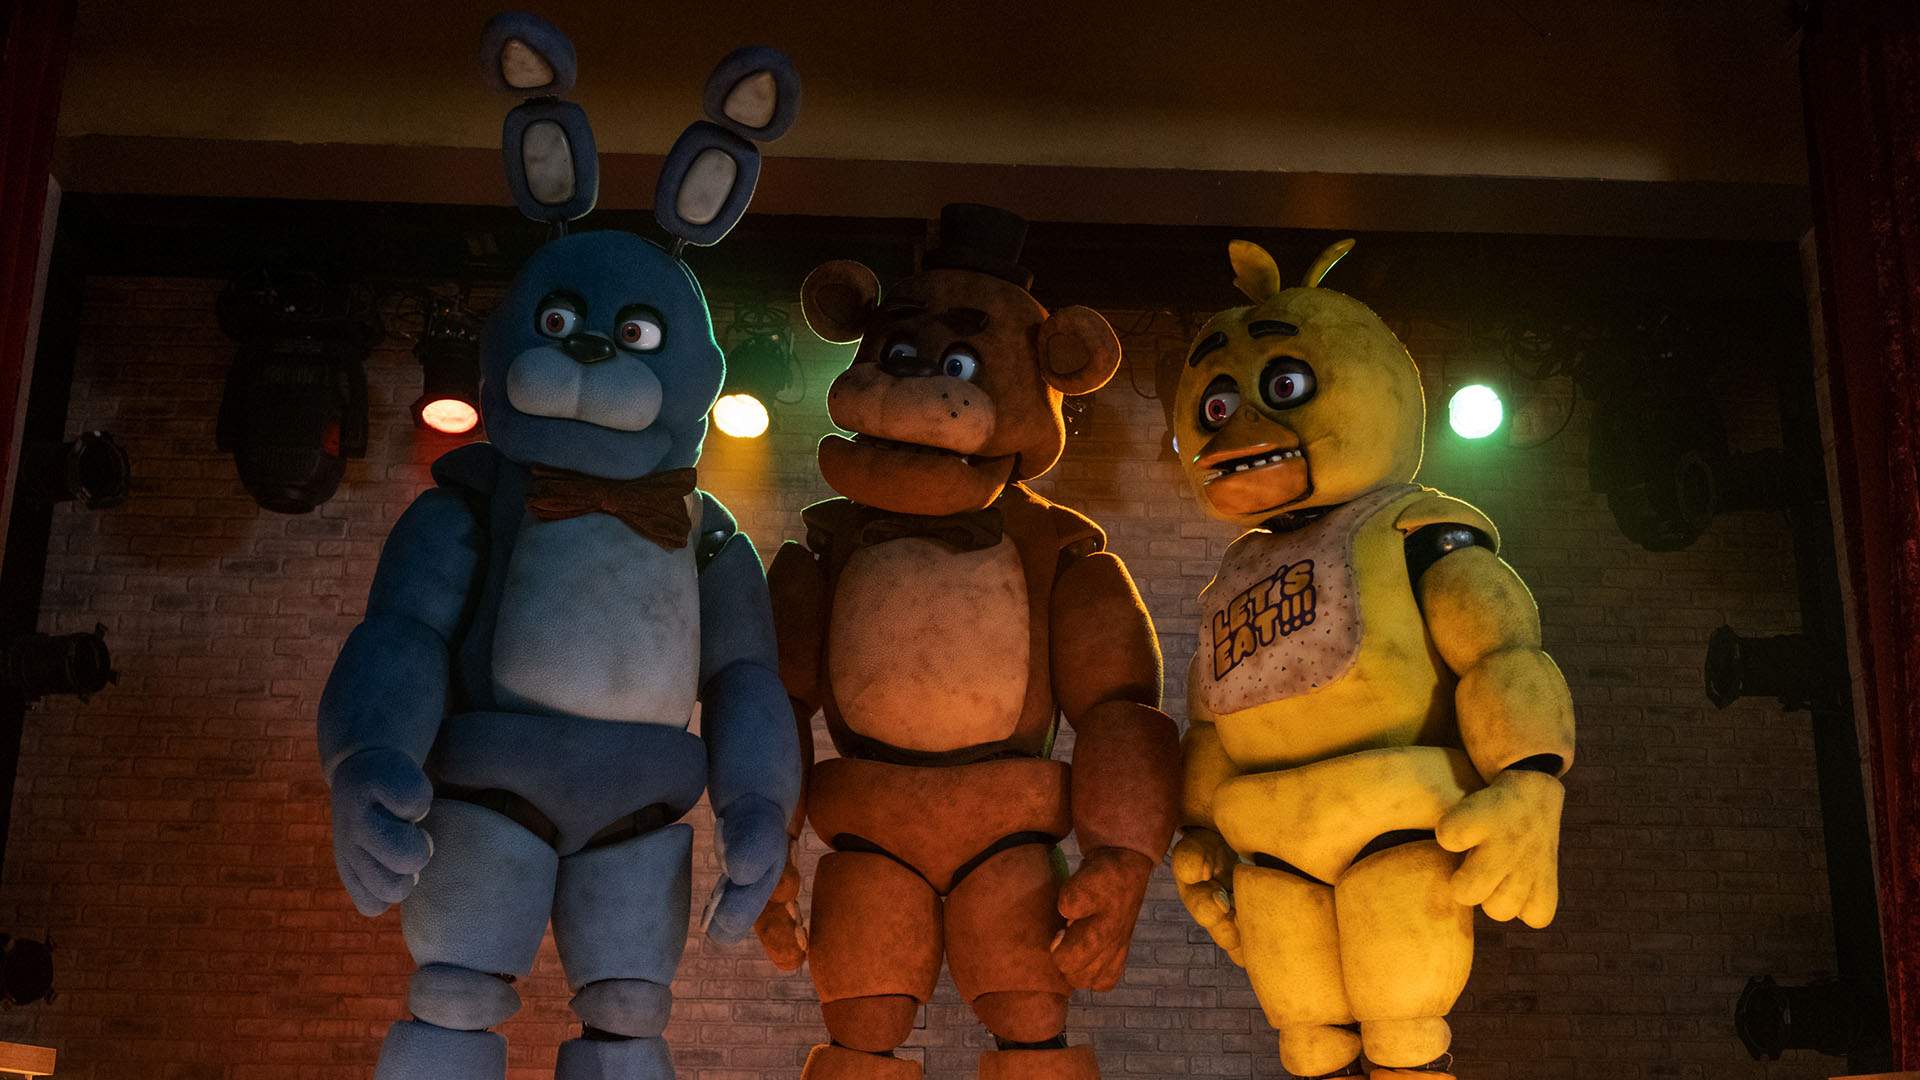 Horror Favourite 'Five Nights at Freddy's' Is the Latest Game That's Getting the Big-Screen Treatment